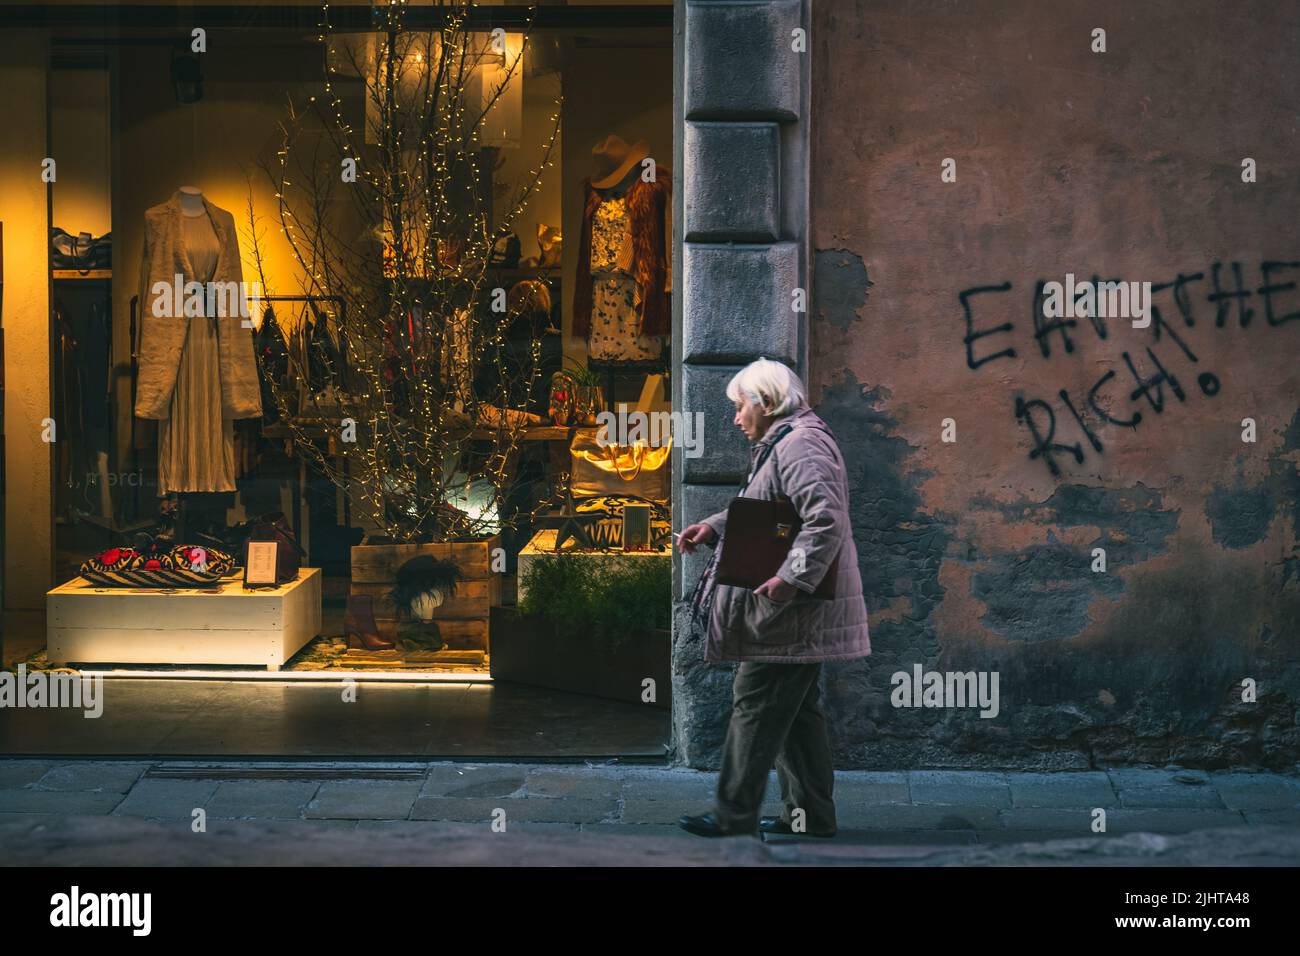 An old lady walking past a fancy fashion shop with graffiti saying 'eat the rich' on the adjoining wall Stock Photo